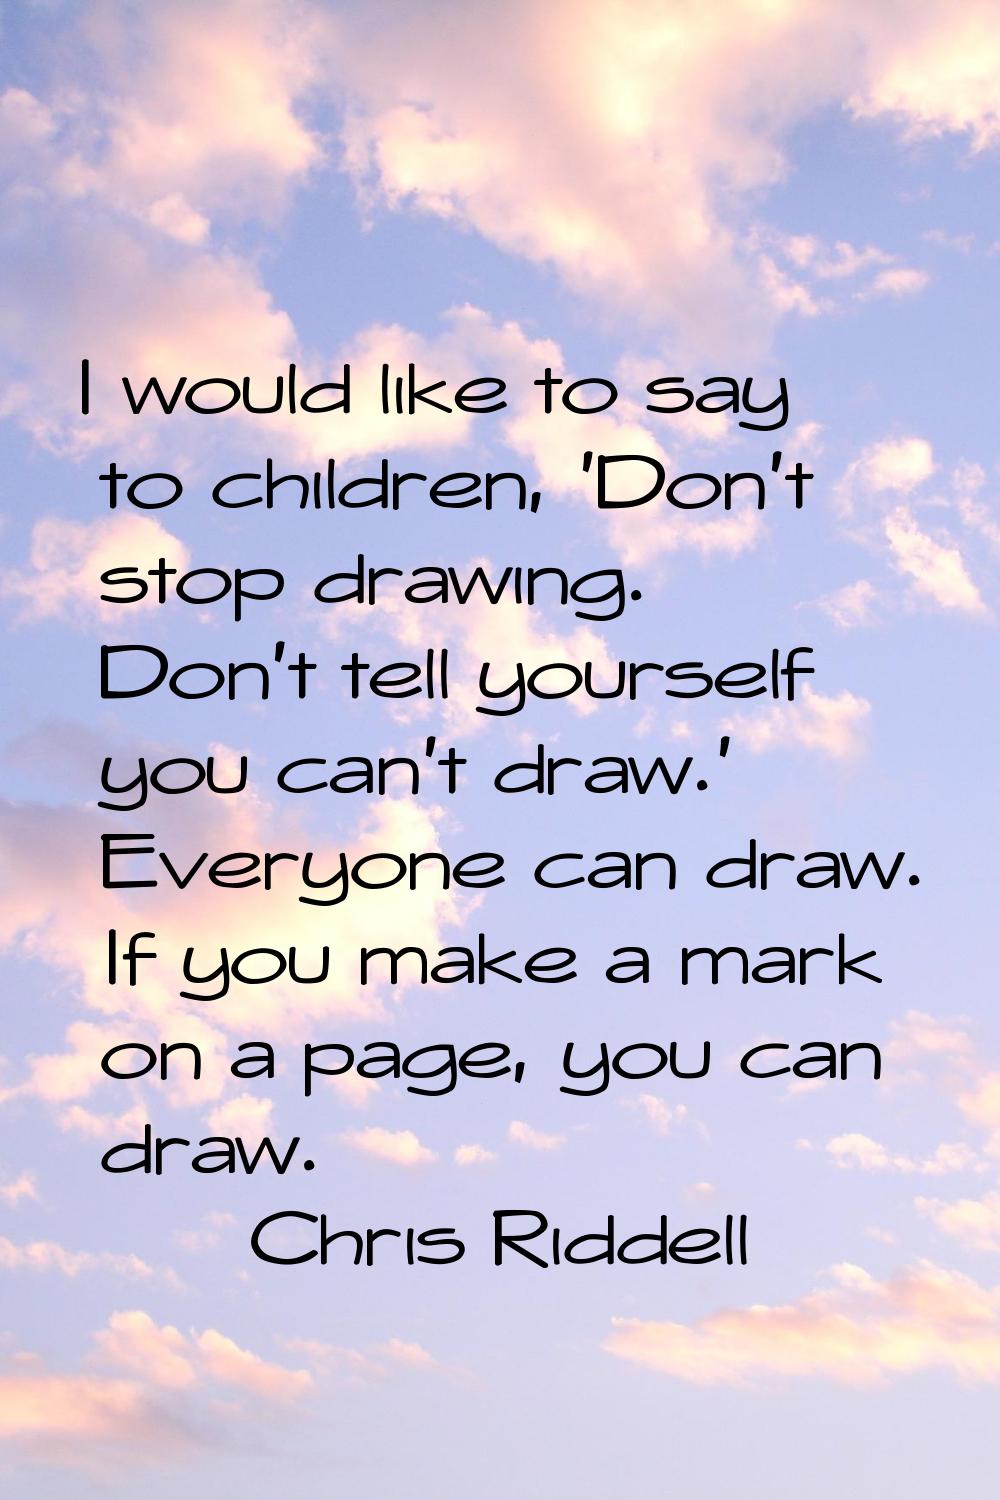 I would like to say to children, 'Don't stop drawing. Don't tell yourself you can't draw.' Everyone